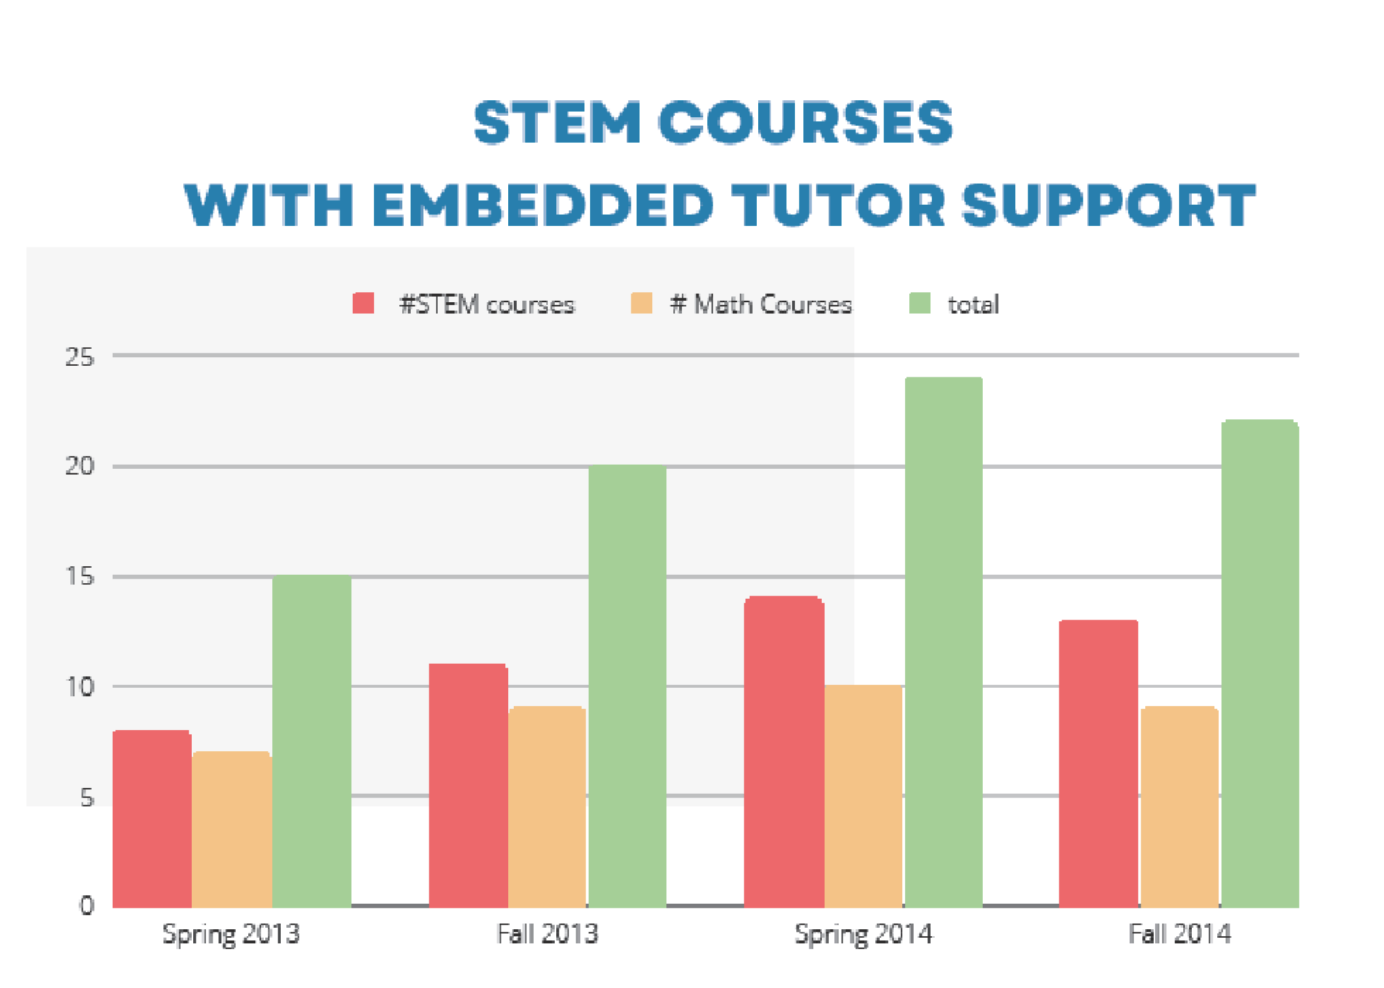 STEM Courses with embedded tutor support